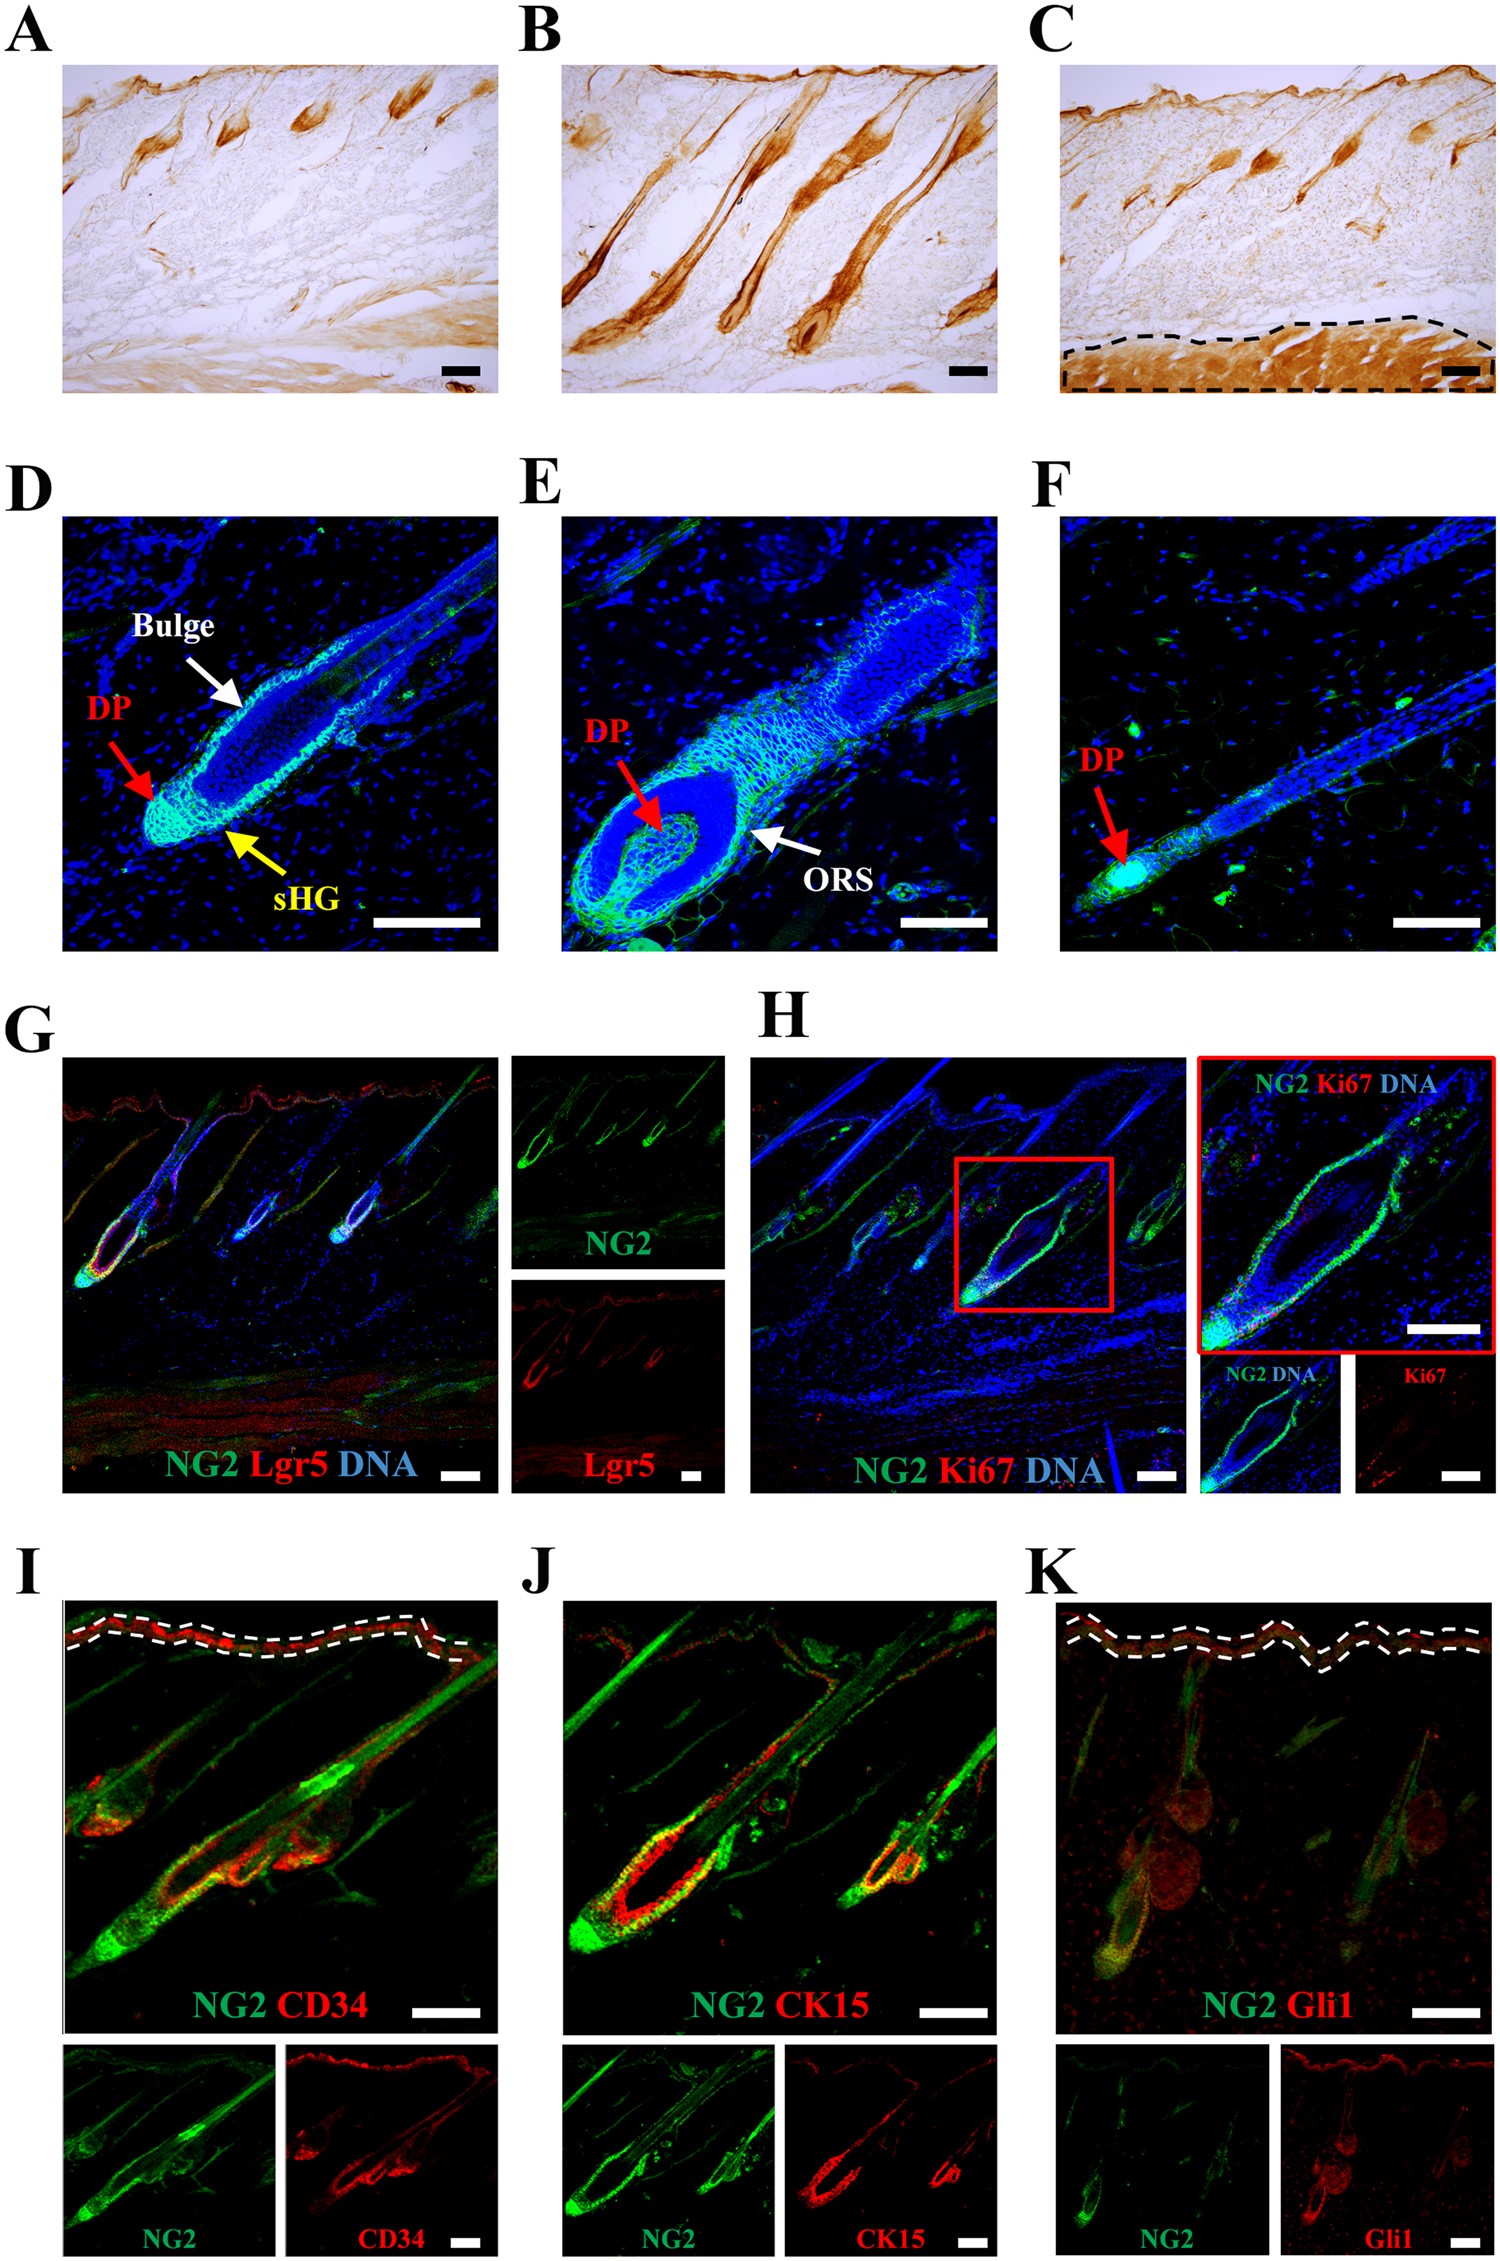 In vivo monitoring of hair cycle stages via bioluminescence imaging of hair  follicle NG2 cells | Scientific Reports